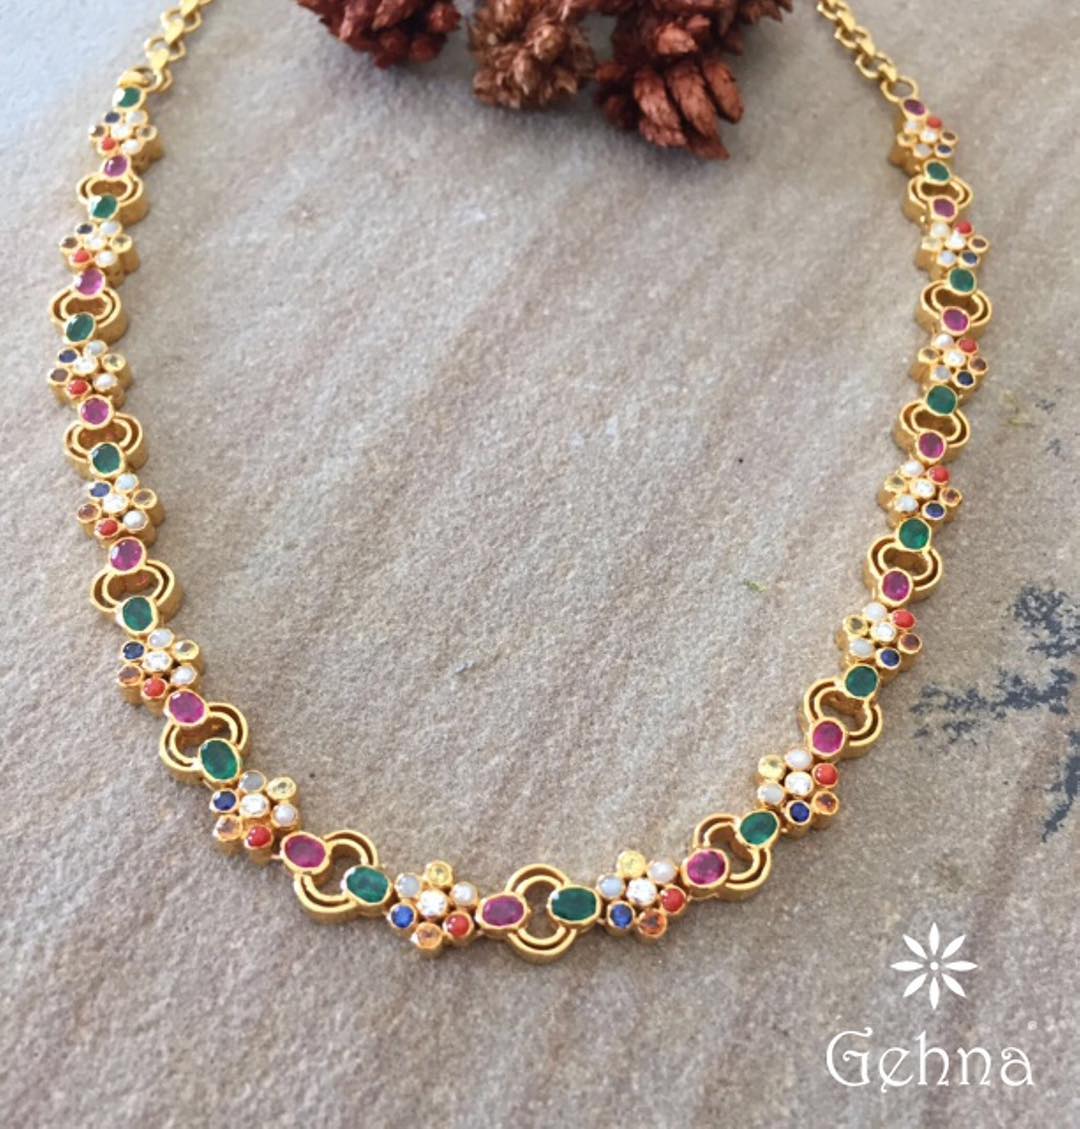 Gehna India Personalized Jewellery Collections